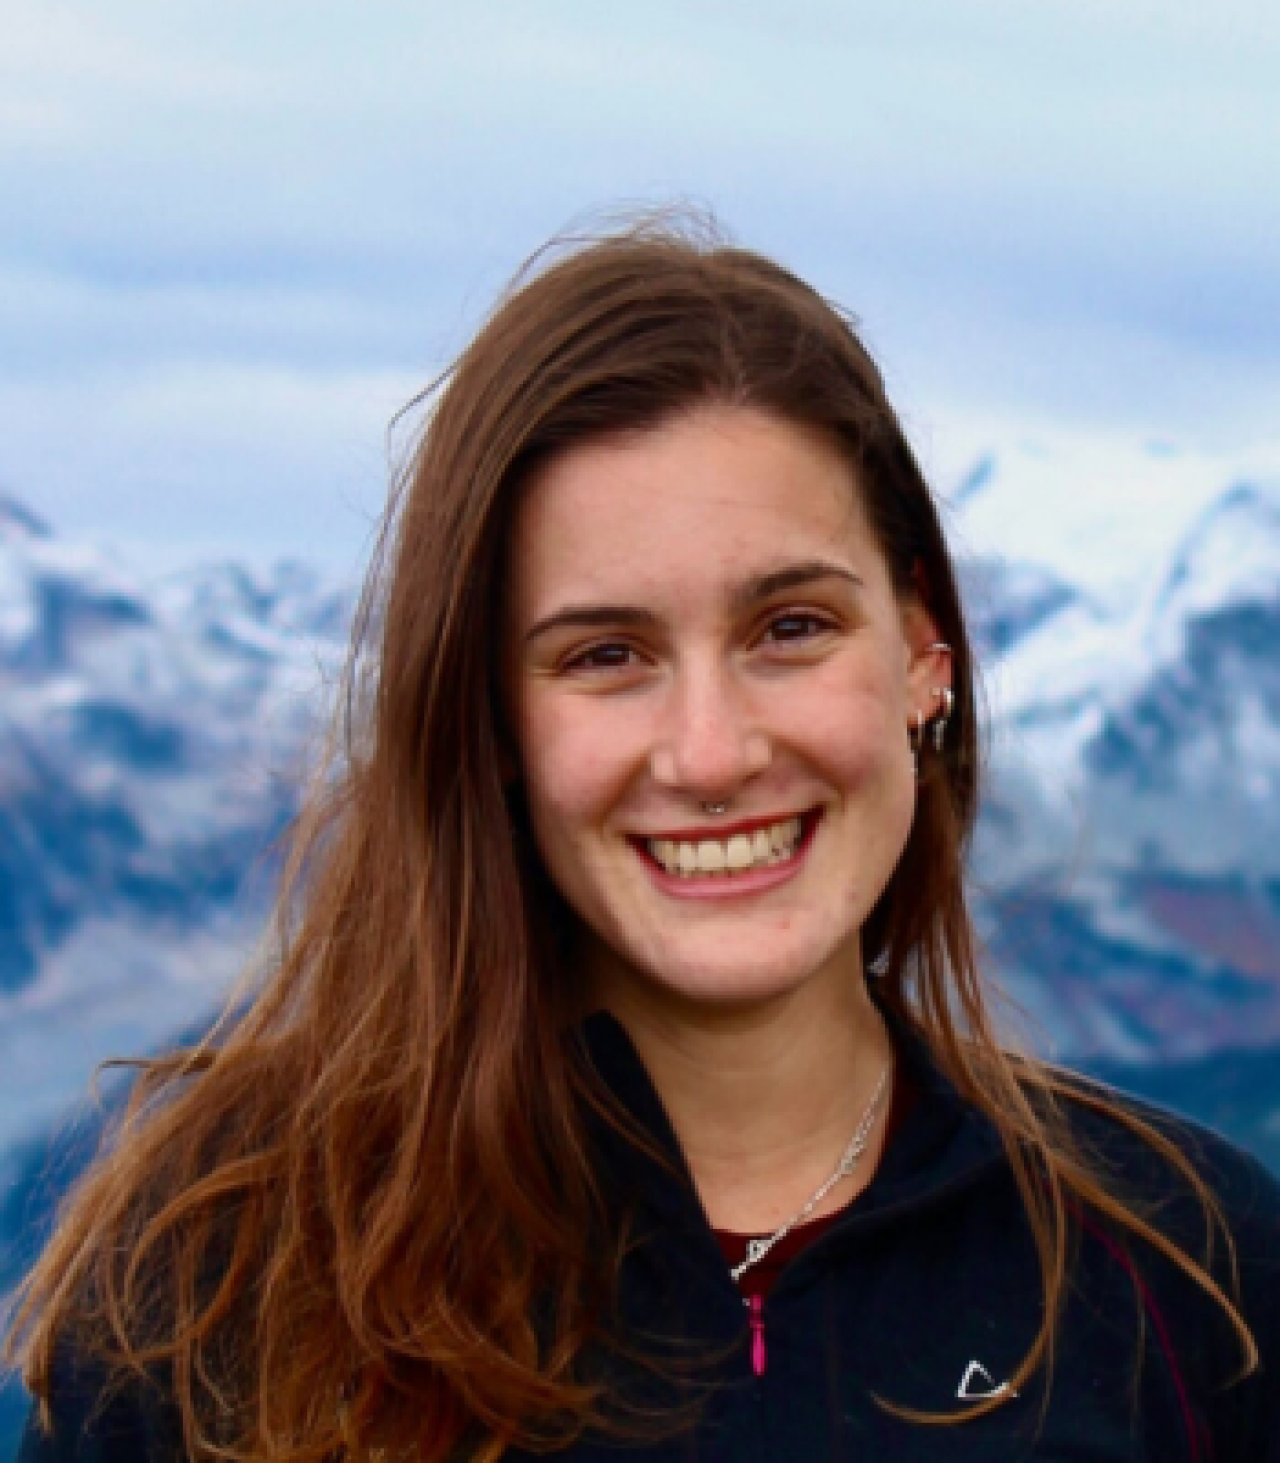 Sarah Kromberg, BSc's profile picture